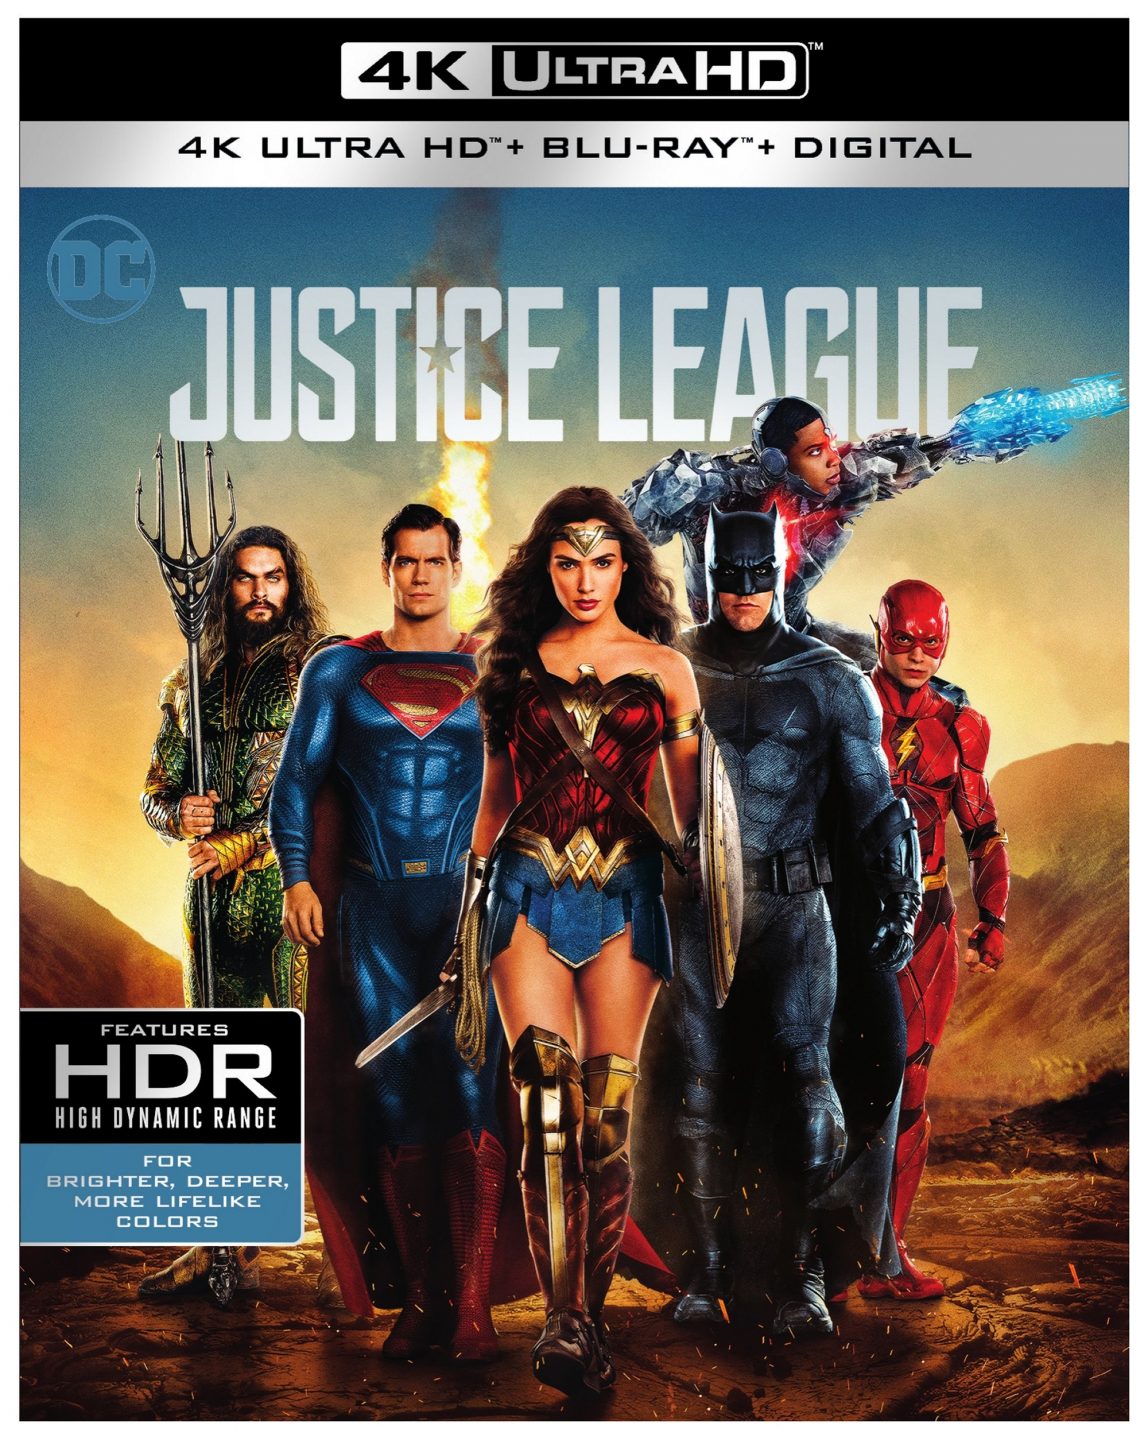 Justice League 4K Ultra HD Combo cover (Warner Bros. Home Entertainment)